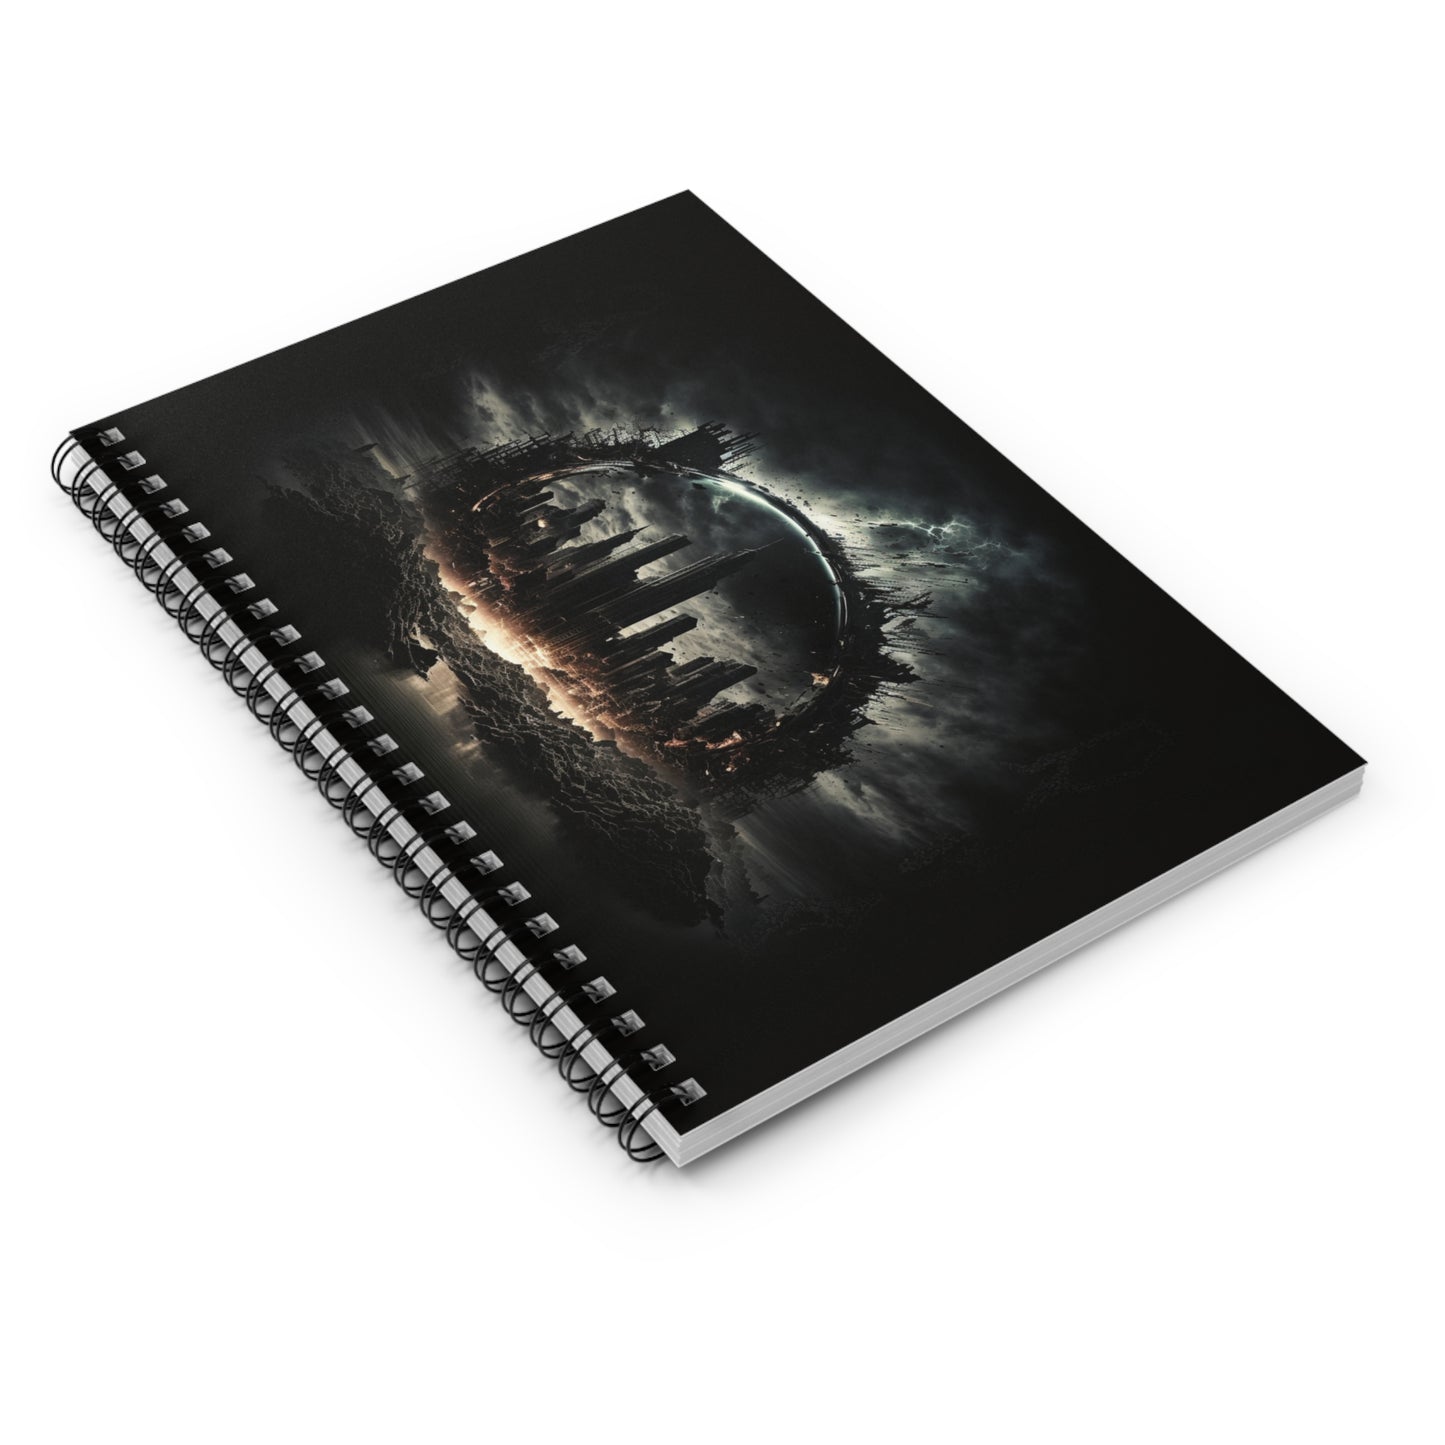 Metallic Hell Cityscape Spiral Notebook - Ruled Line